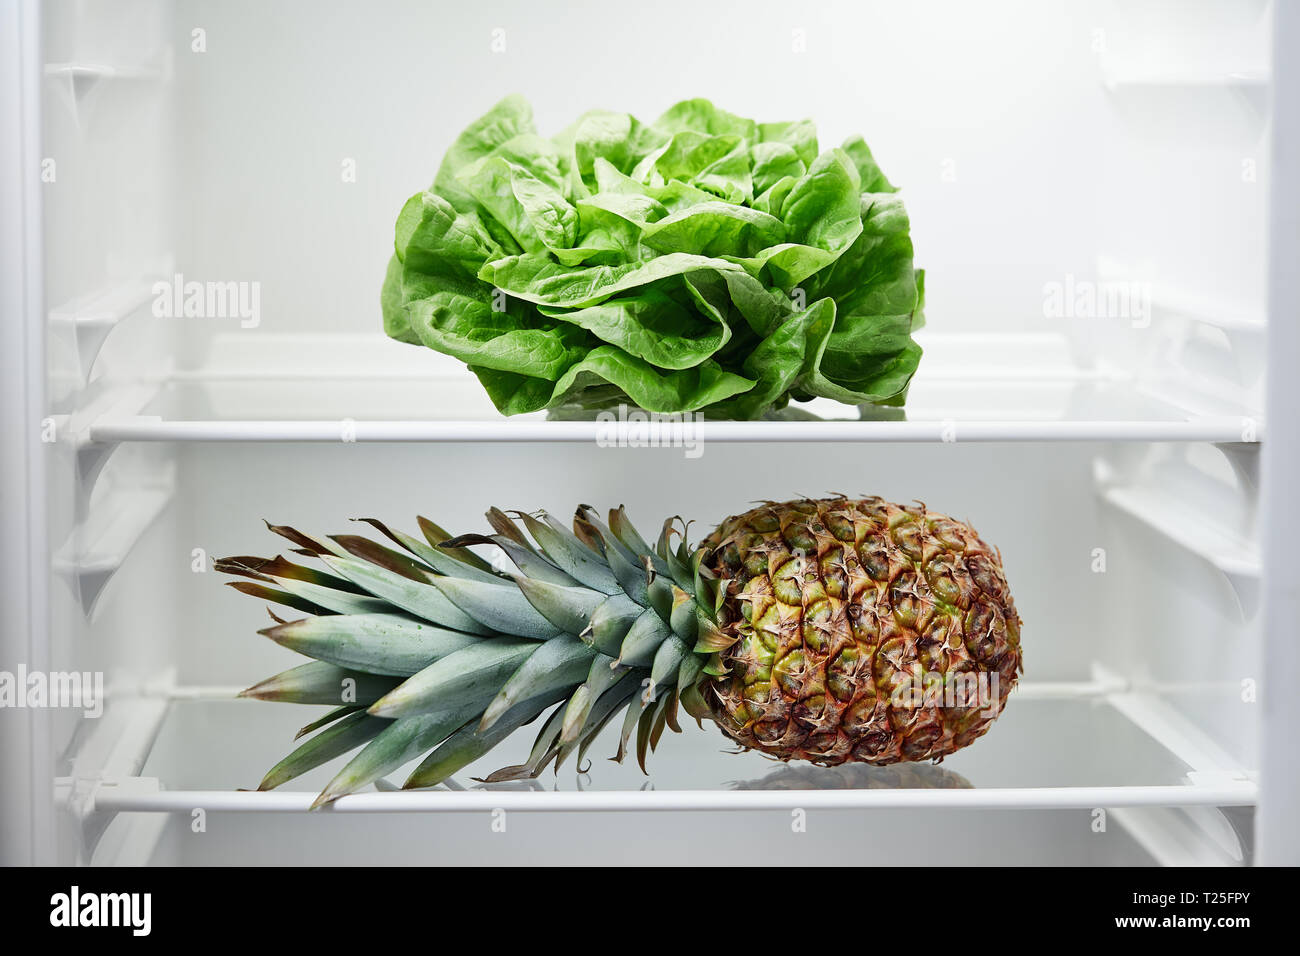 Lettuce and pineapple on shelf in refrigerator. Fridge with open door, close up. Stock Photo